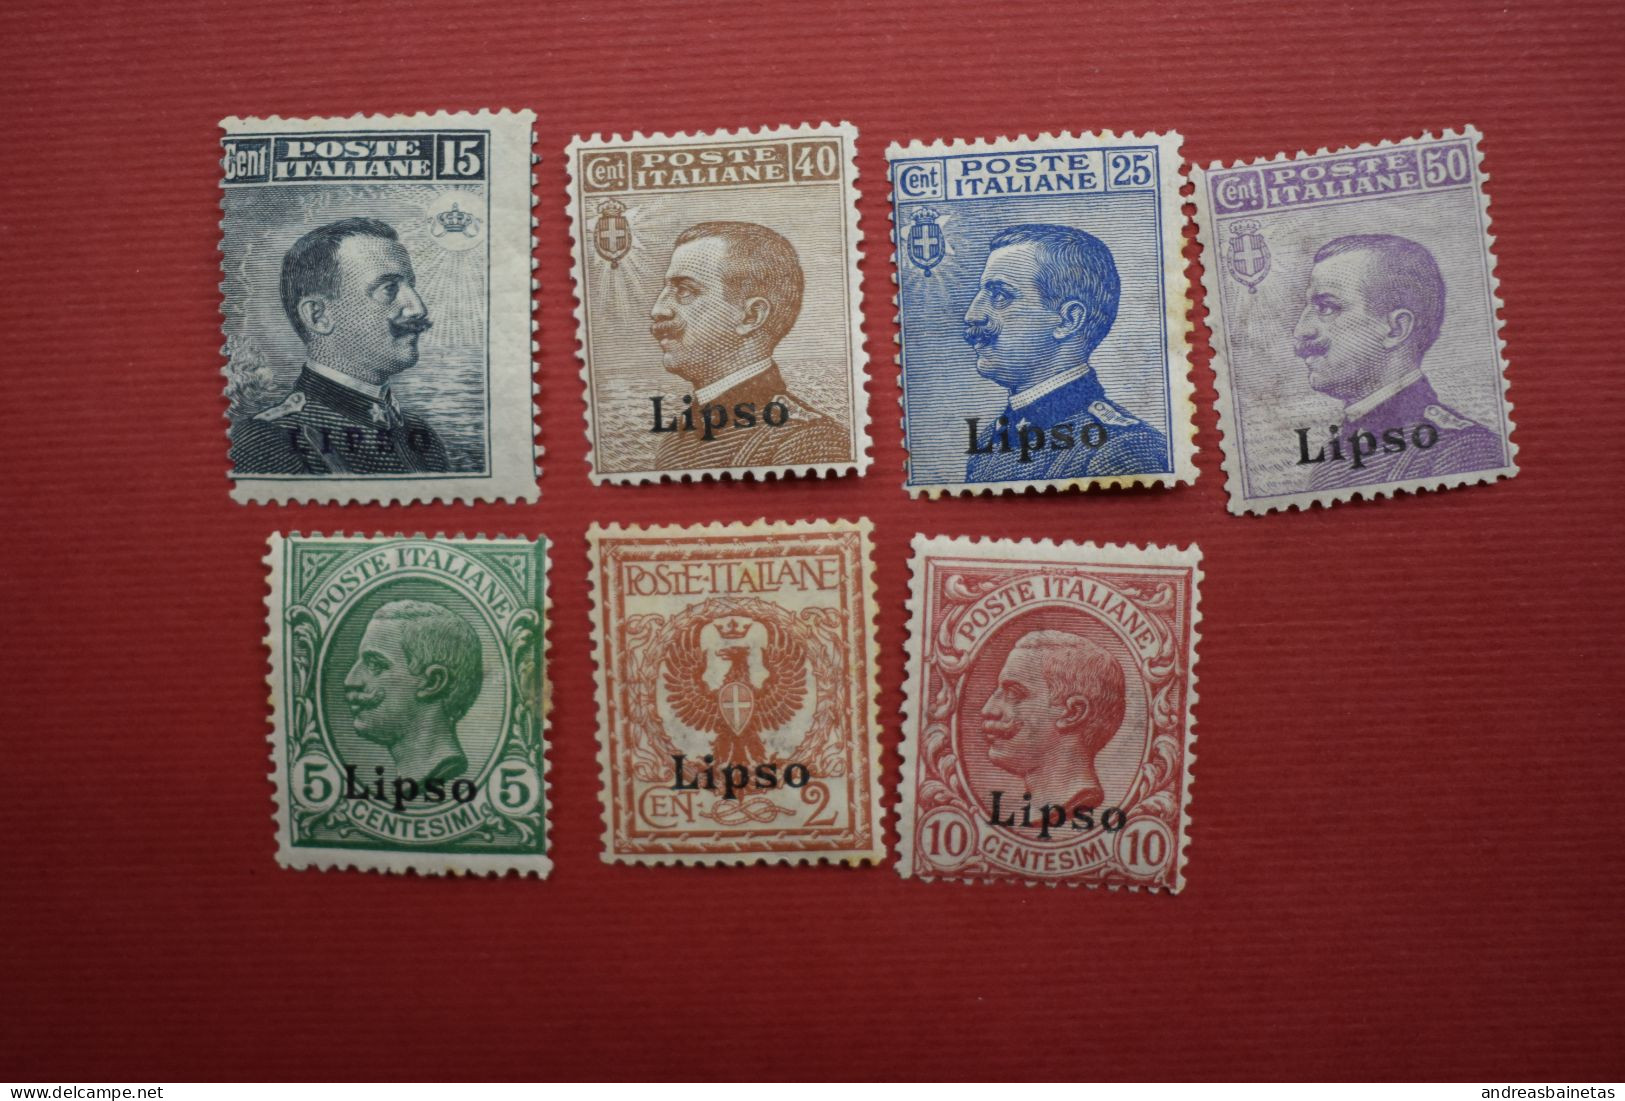 Stamps Greece ITALIAN OCCUPATION - ITALIAN POST 1912 "LIPSO" Ovpt, Complete Set Of 7 Values, M. (Hellas 3VII/9VII). - Dodekanisos